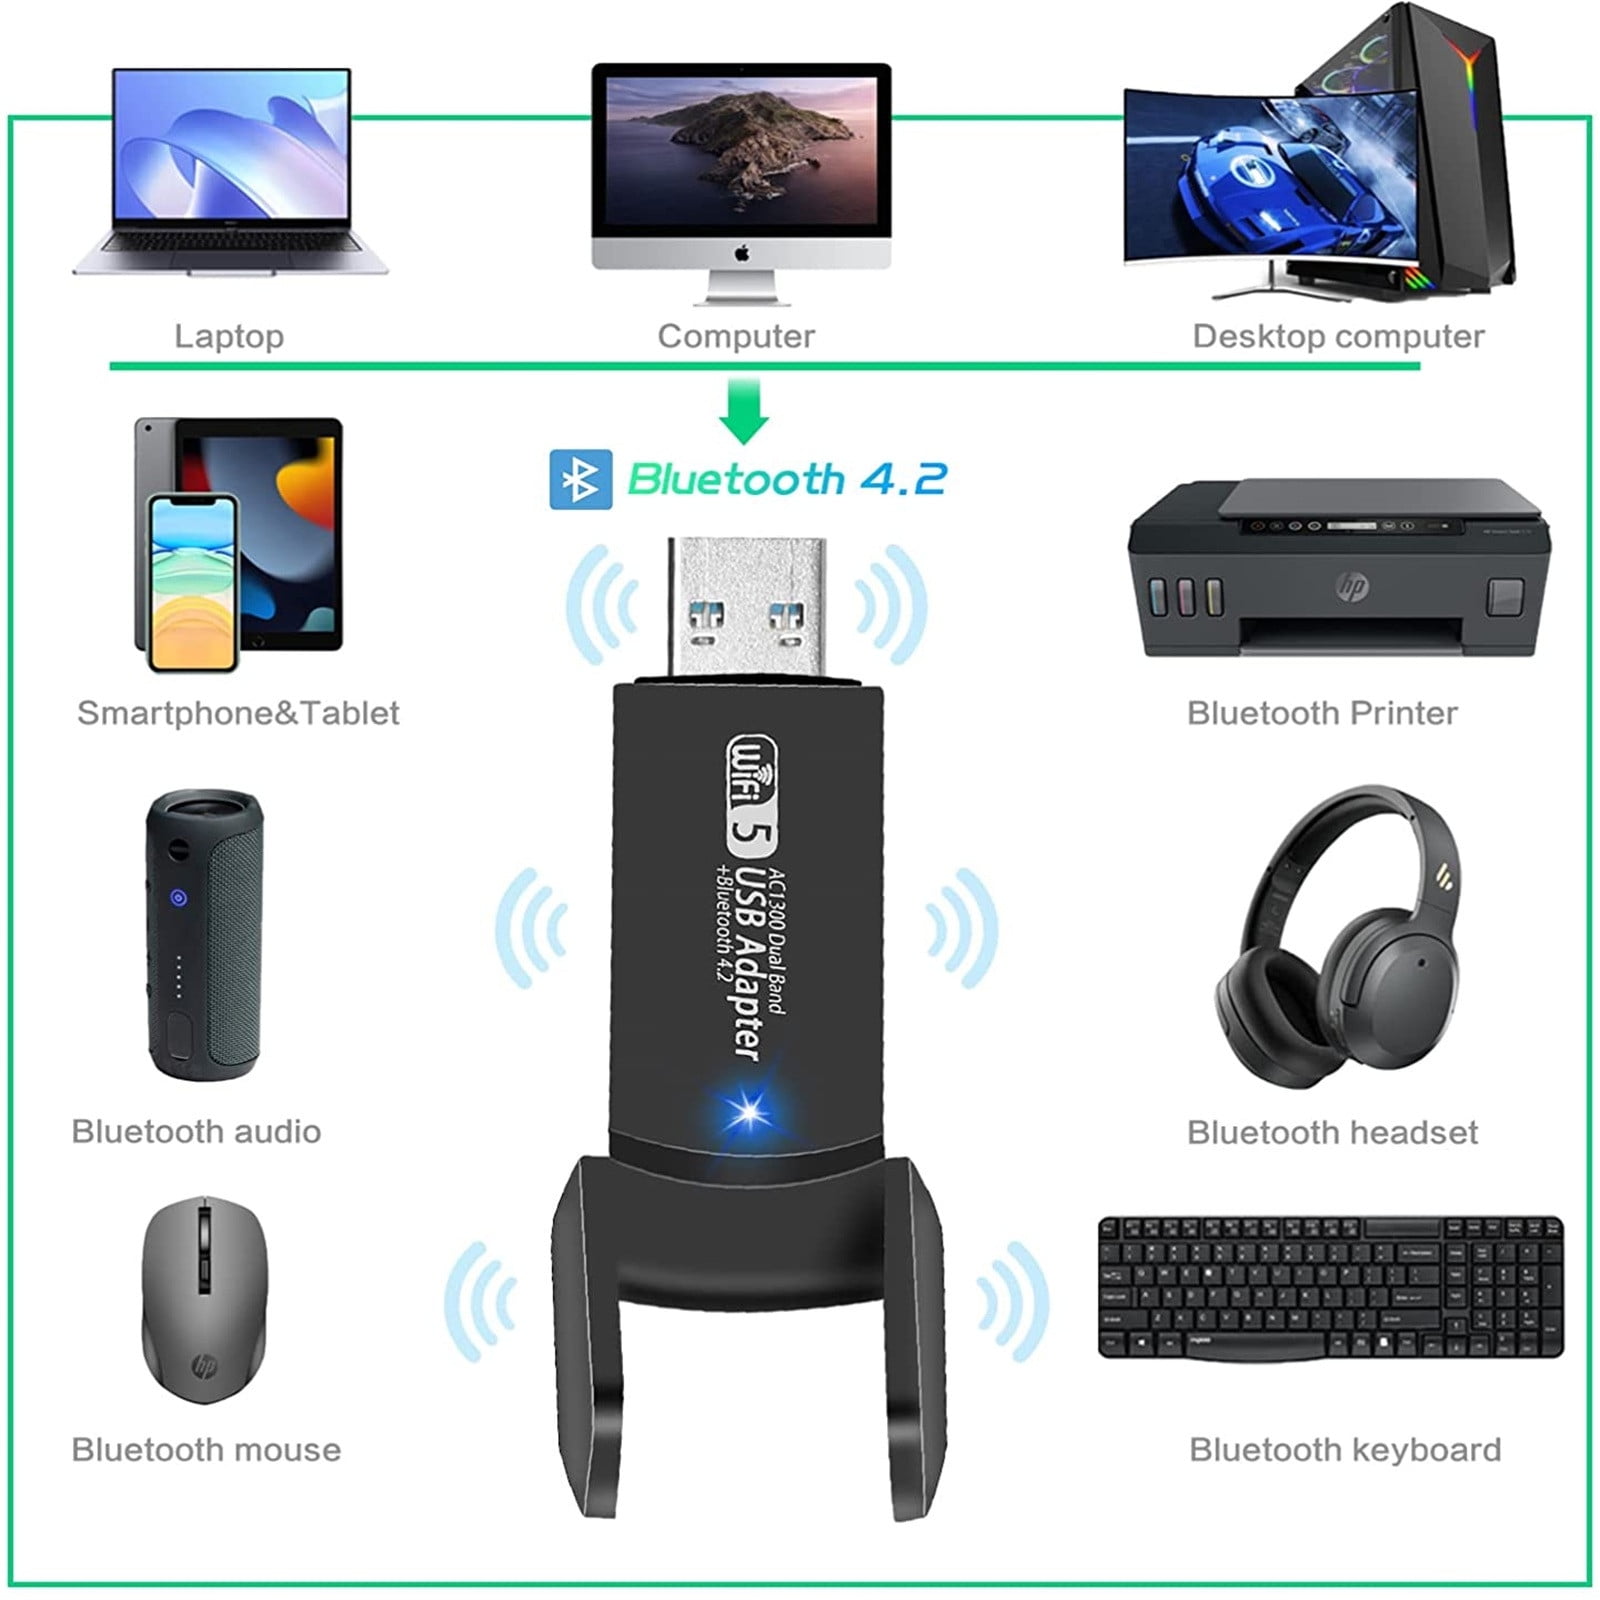 Plugable USB Bluetooth Adapter for PC, Bluetooth 5.0 Dongle Compatible with  Windows, Add 7 Devices: Headphones, Speakers, Keyboard, Mouse, Printer and